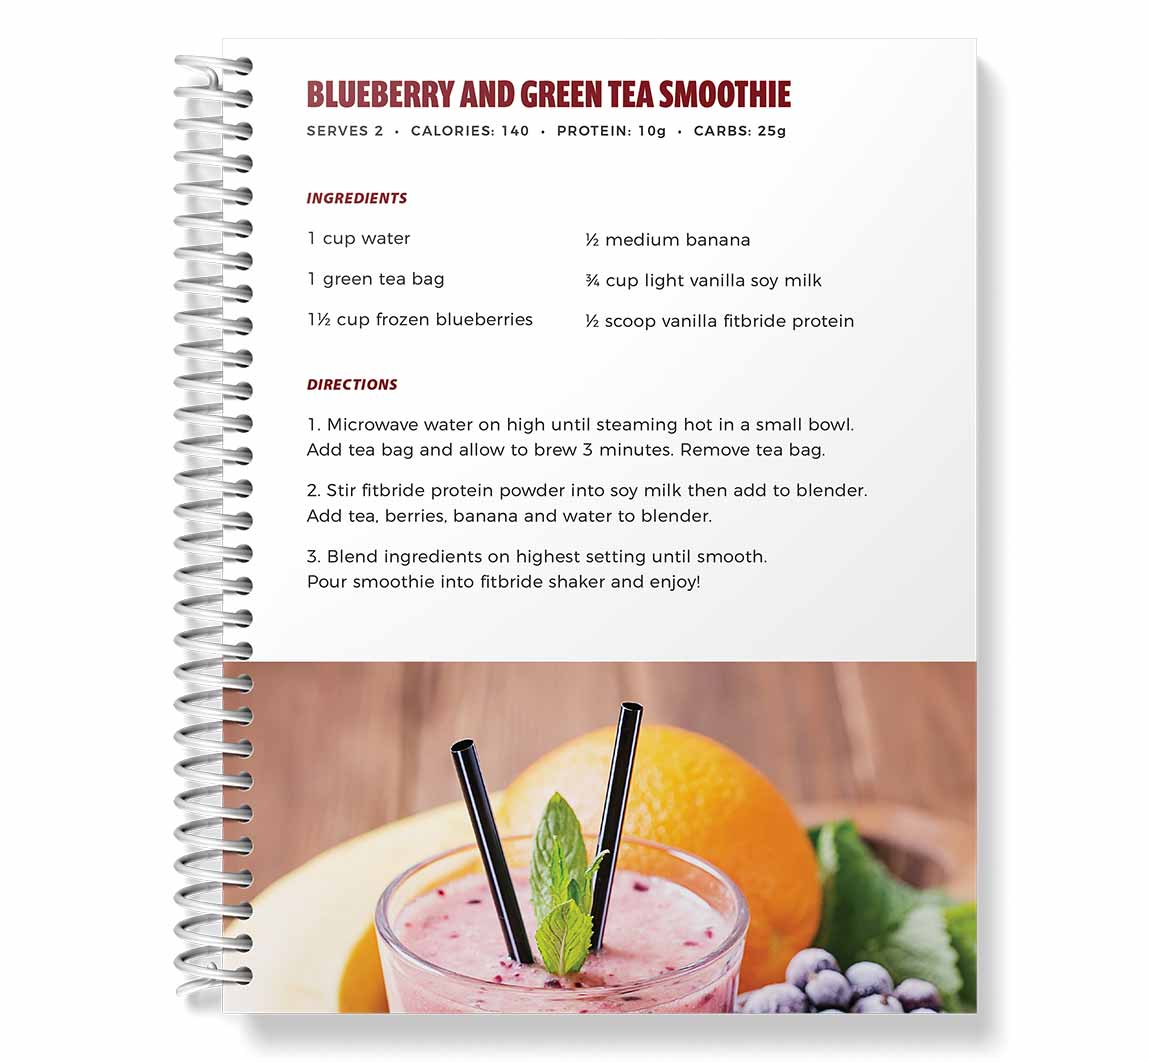 Smoothie recipes from the Fitbride Detox Guide